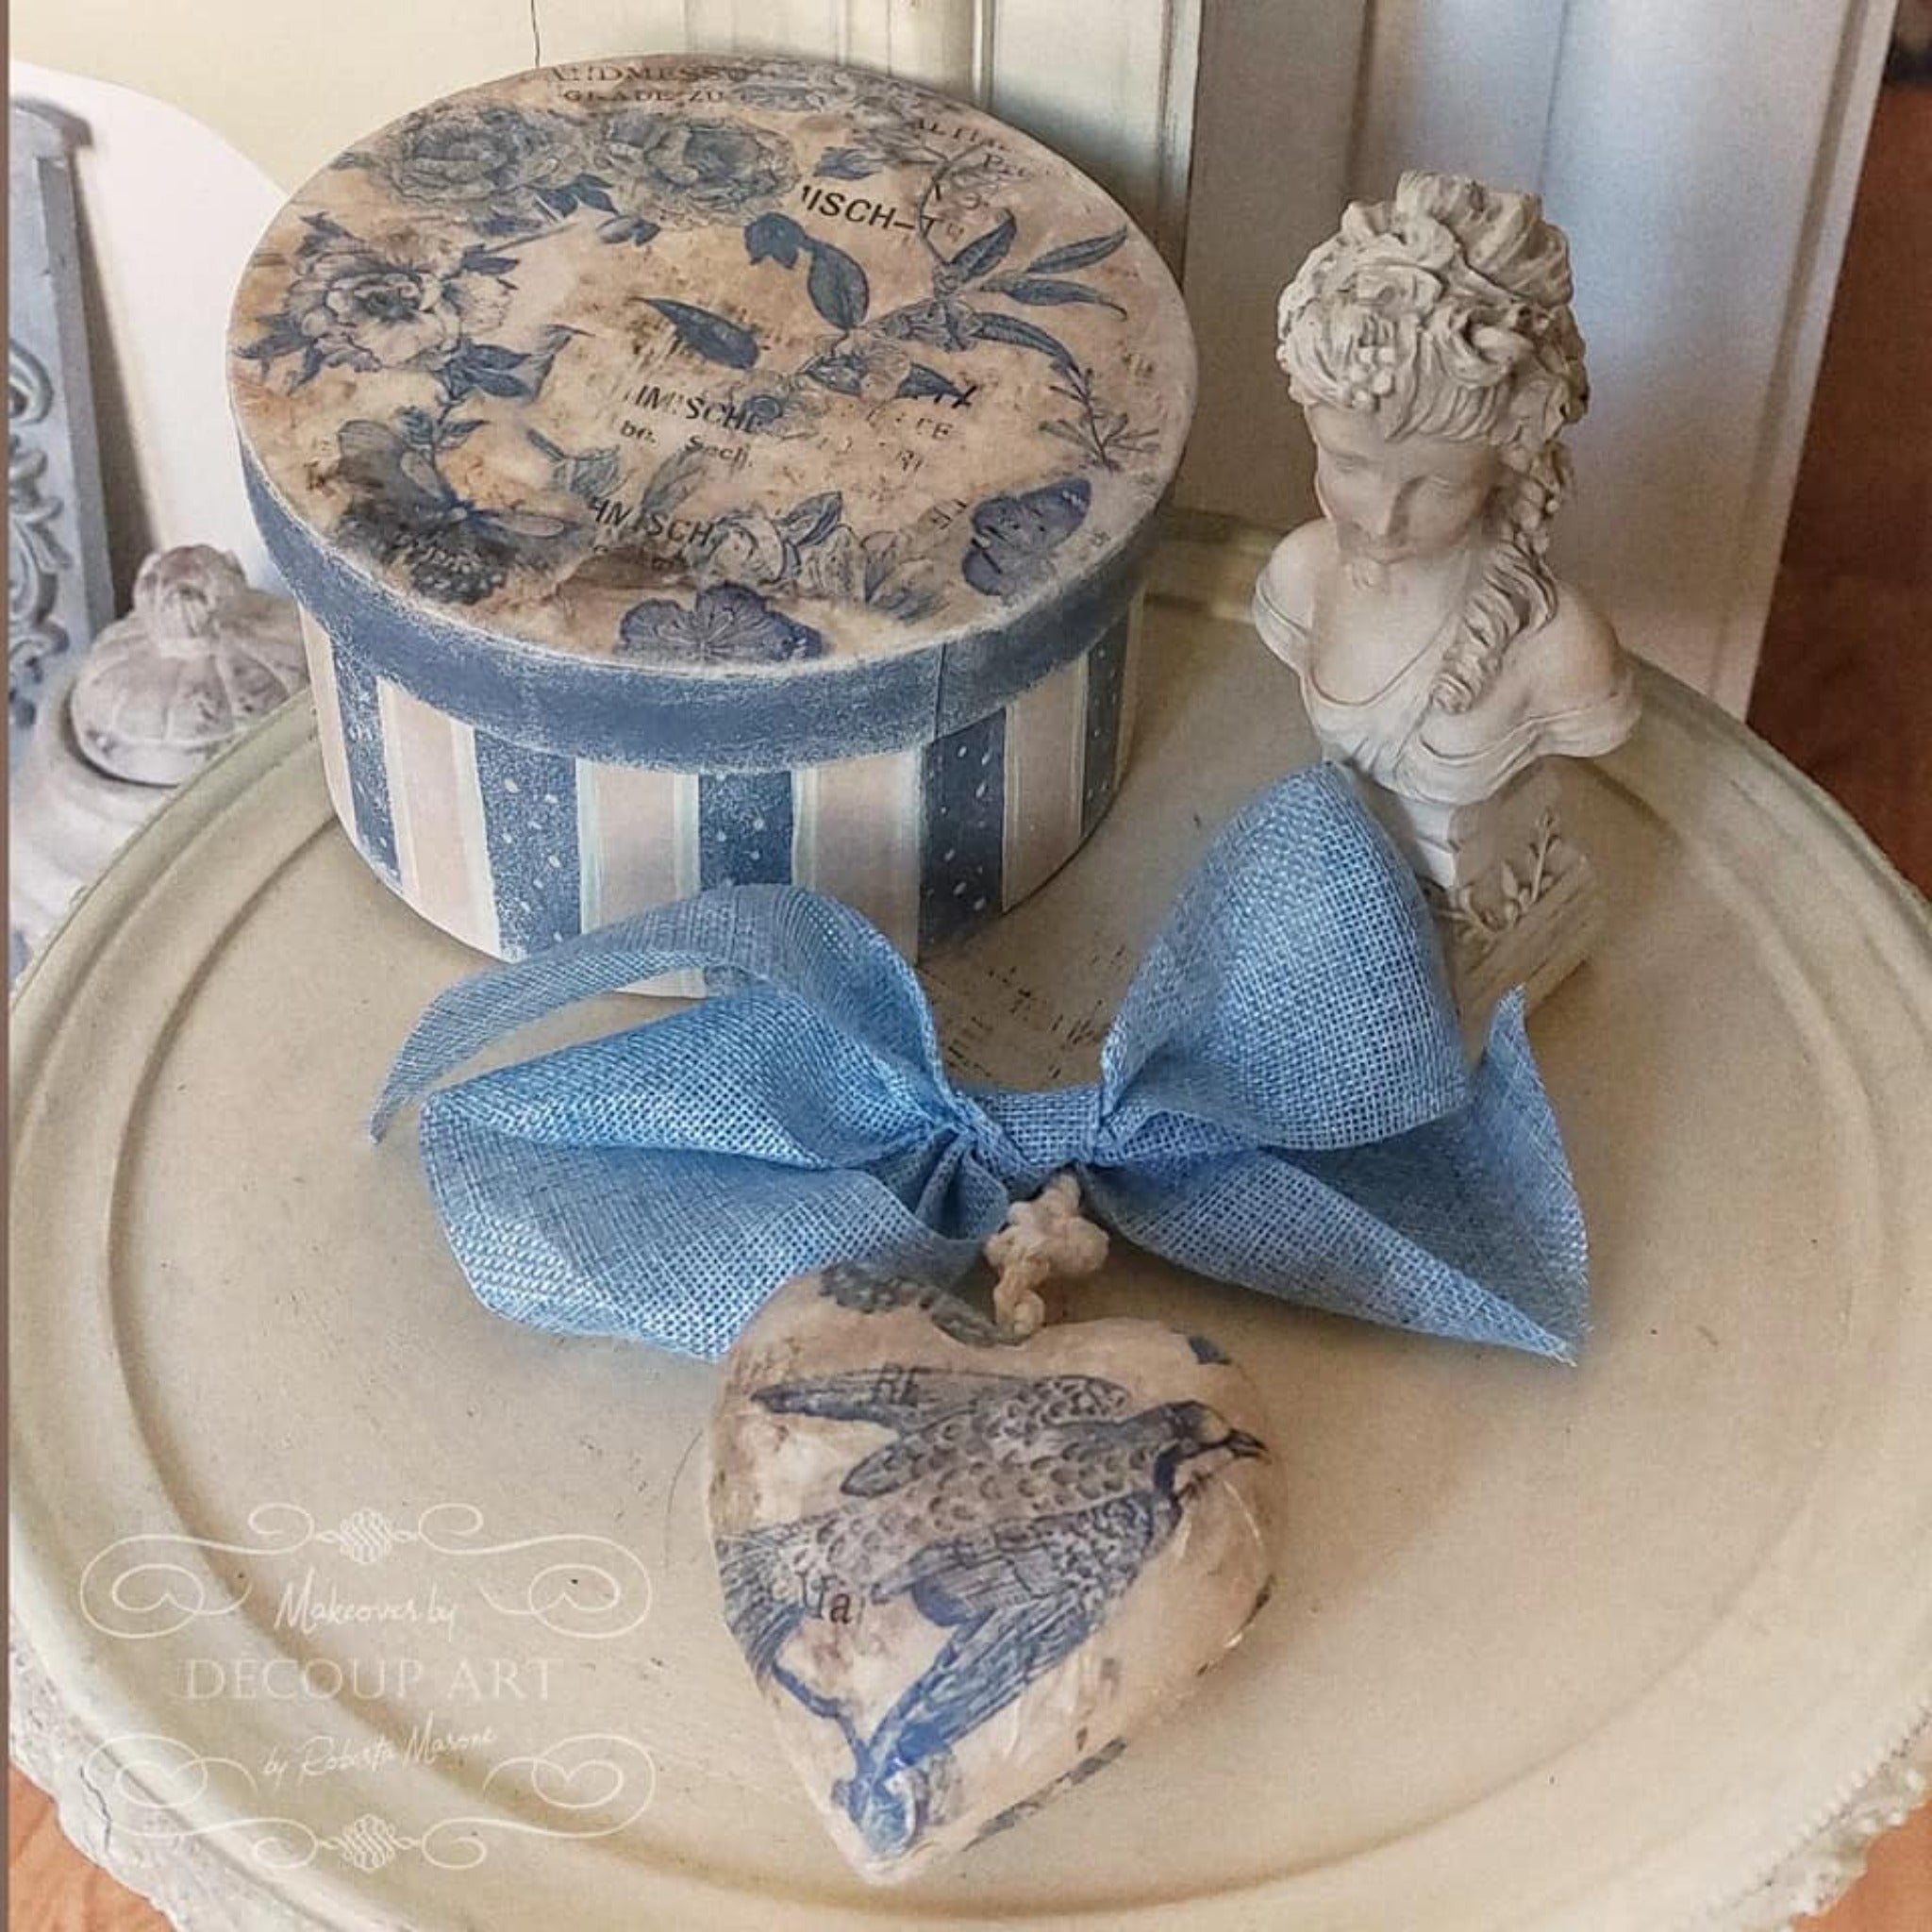 Decoupage Queen's Blue Flight rice paper is featured on a heart craft project. The rice paper is also featured on the top of a round hat box at the top left of the picture.